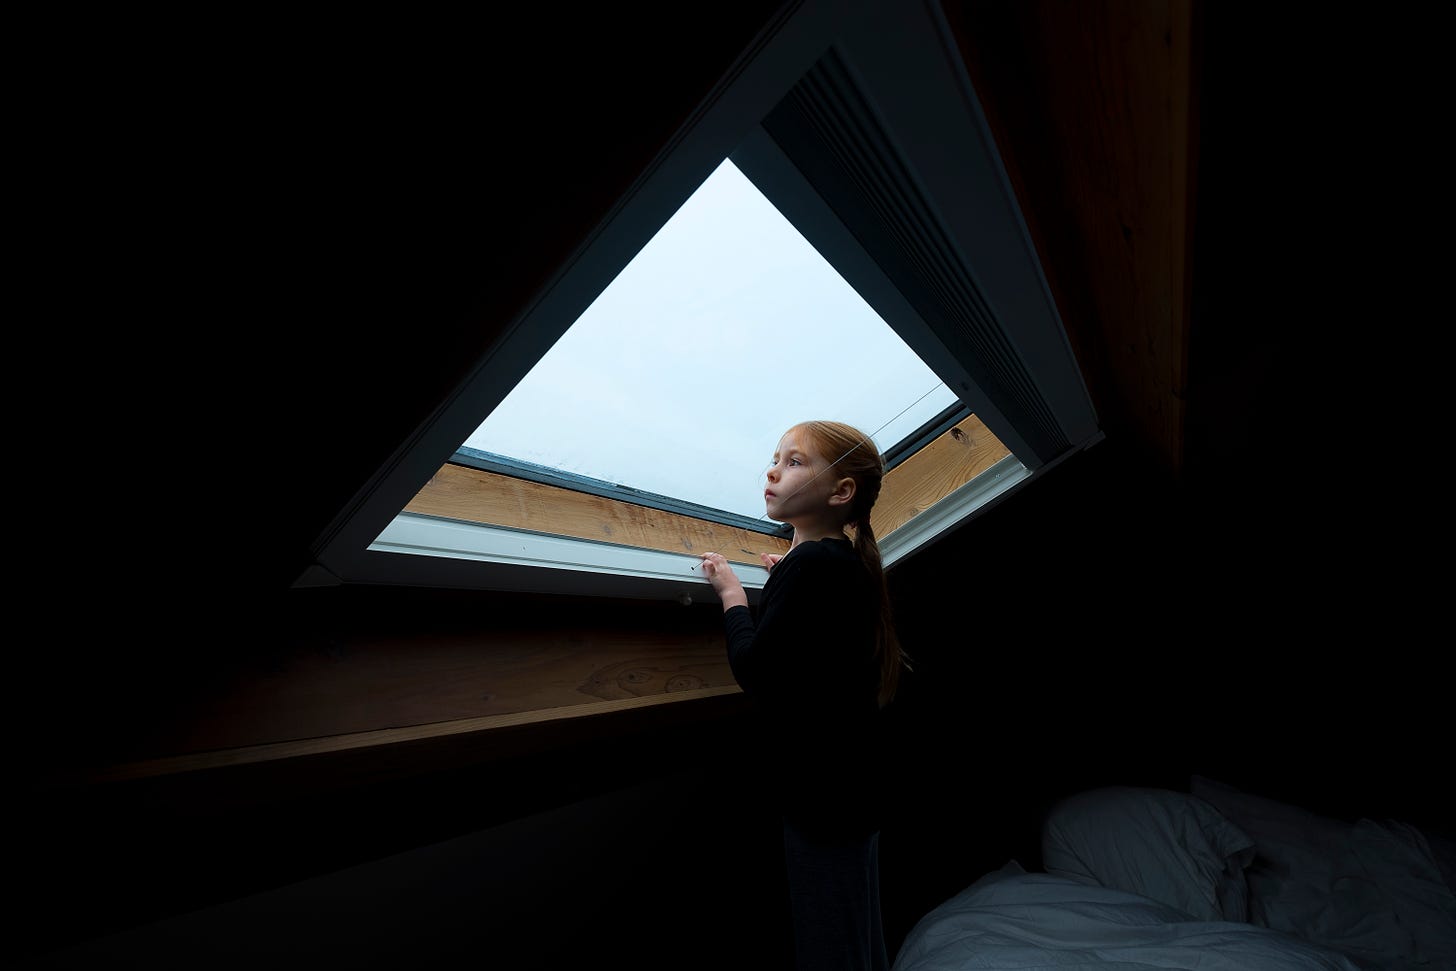 A young girl with red hair peers out of a skylight window in an A Frame bedroom